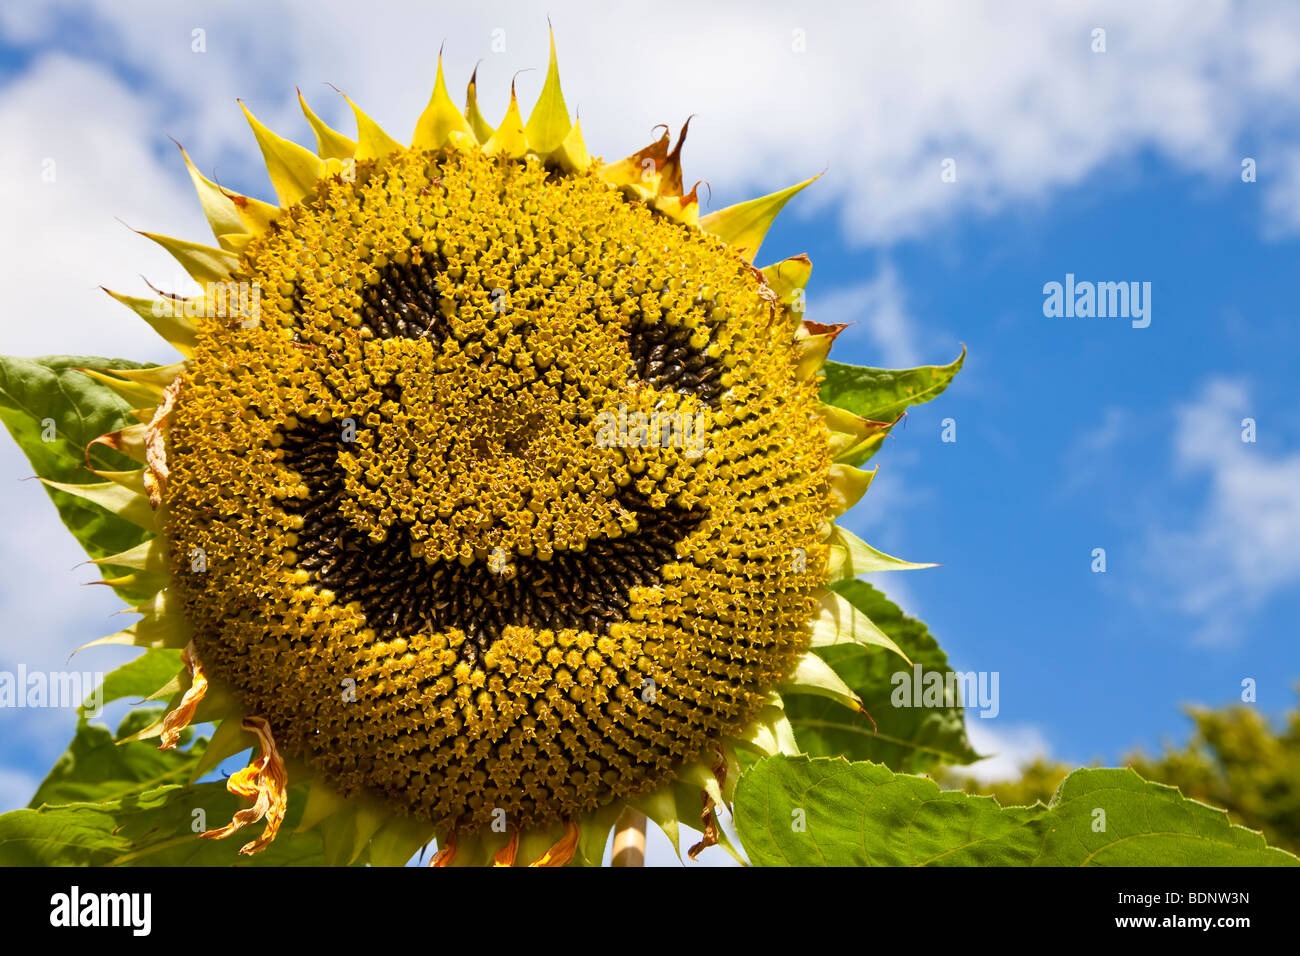 A sunflower with a smiley face created in its seeds. Stock Photo